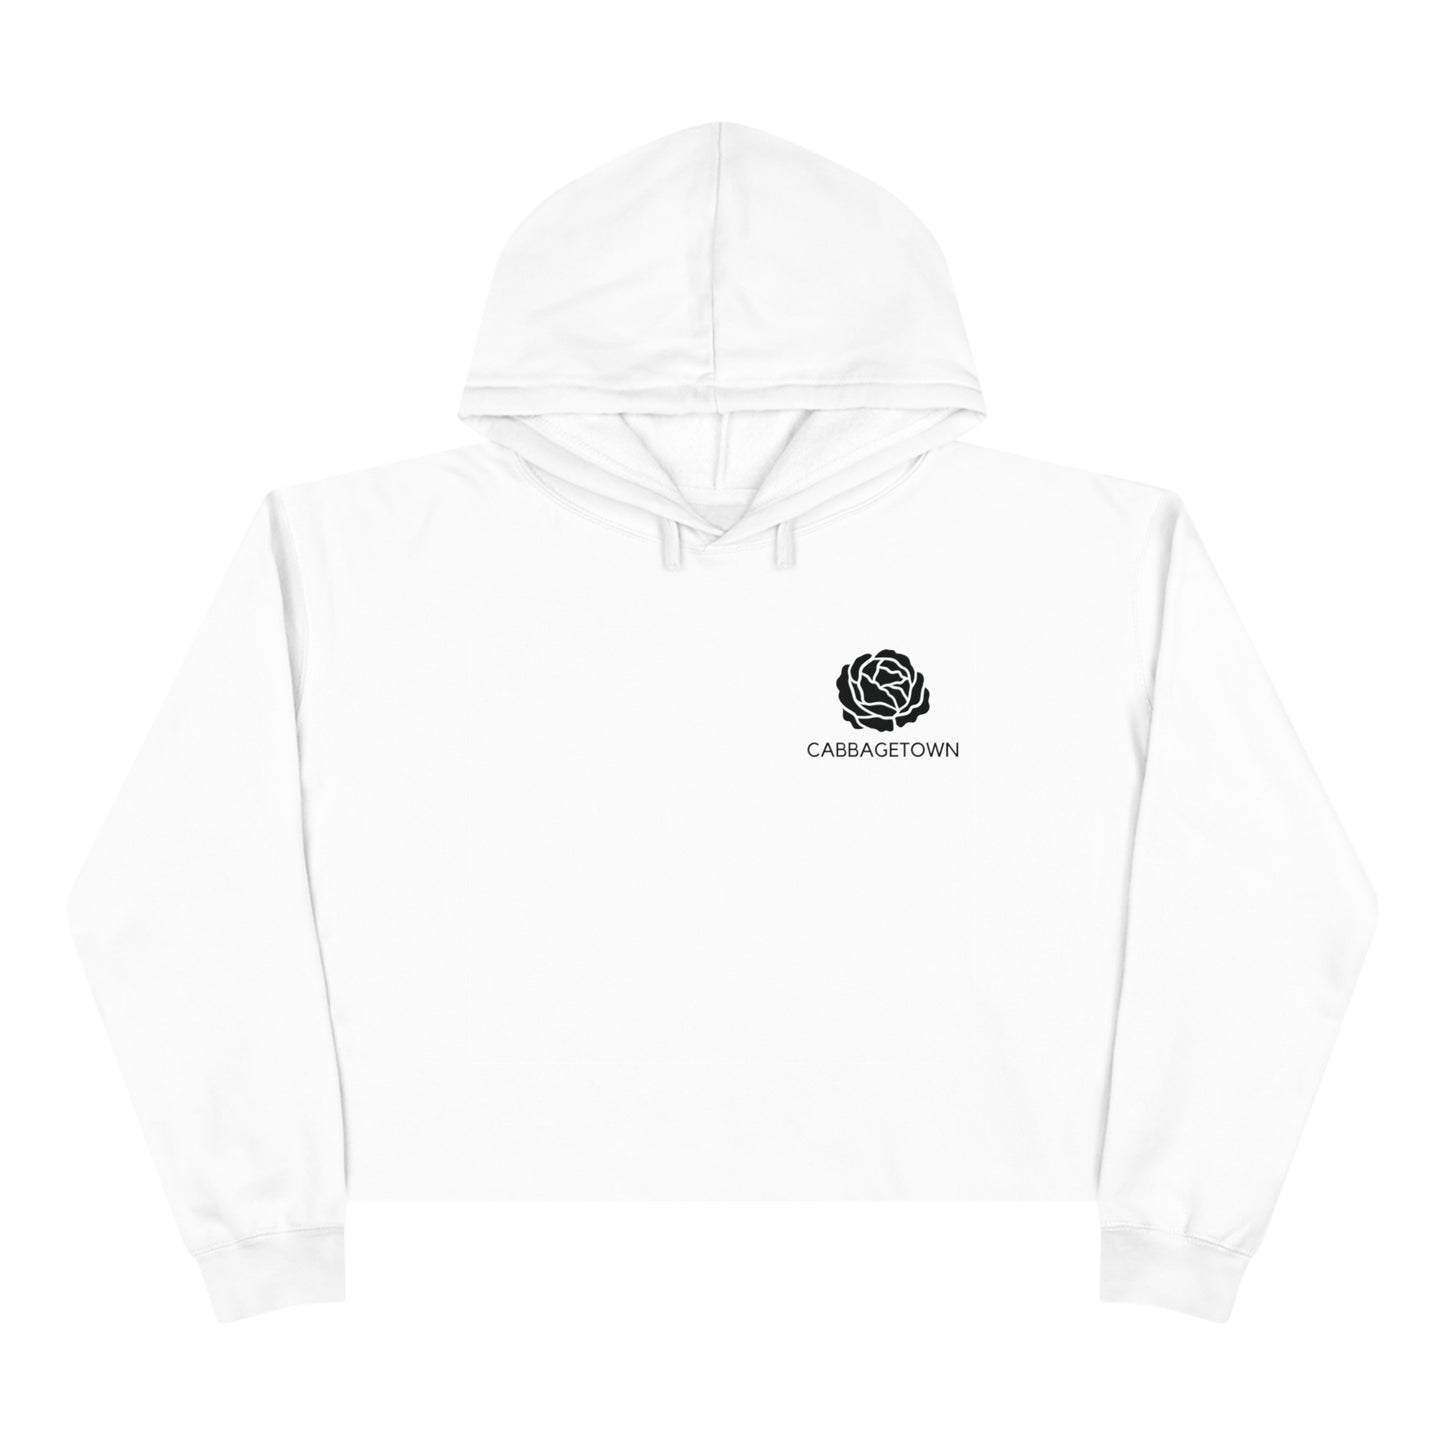 A Crop Hoodie with Monochrome Cabbagetown and Super Bargain Logo by Printify, with a small black logo of a rose and the word "Toronto Cabbagetown" printed on the left chest area. The hoodie has a front pouch pocket and drawstrings.